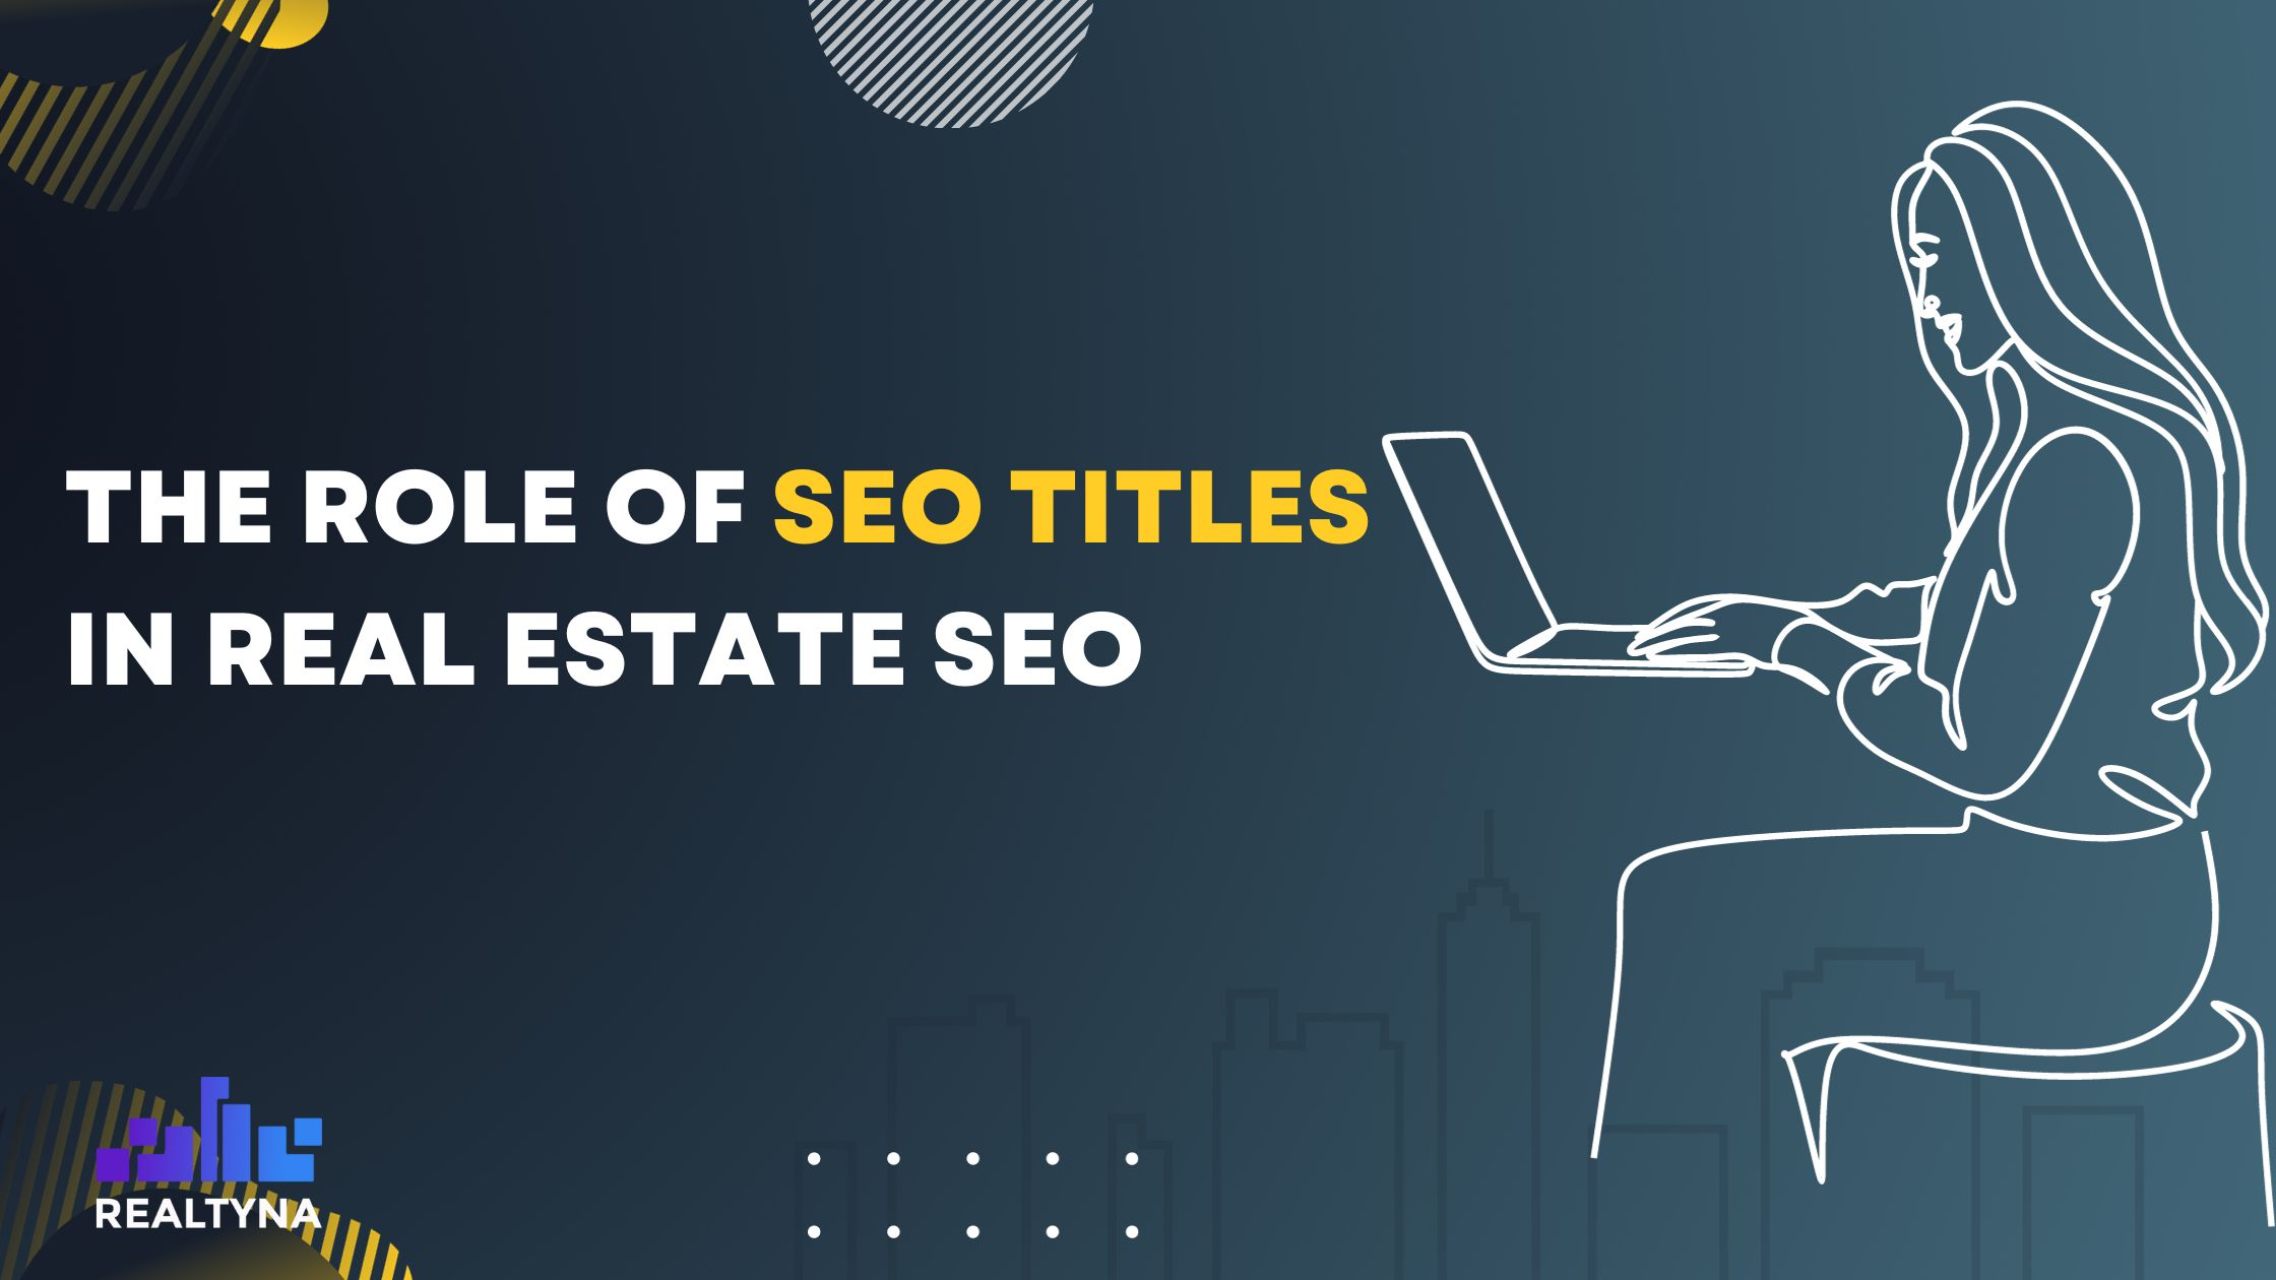 The role of SEO titles in real estate SEO